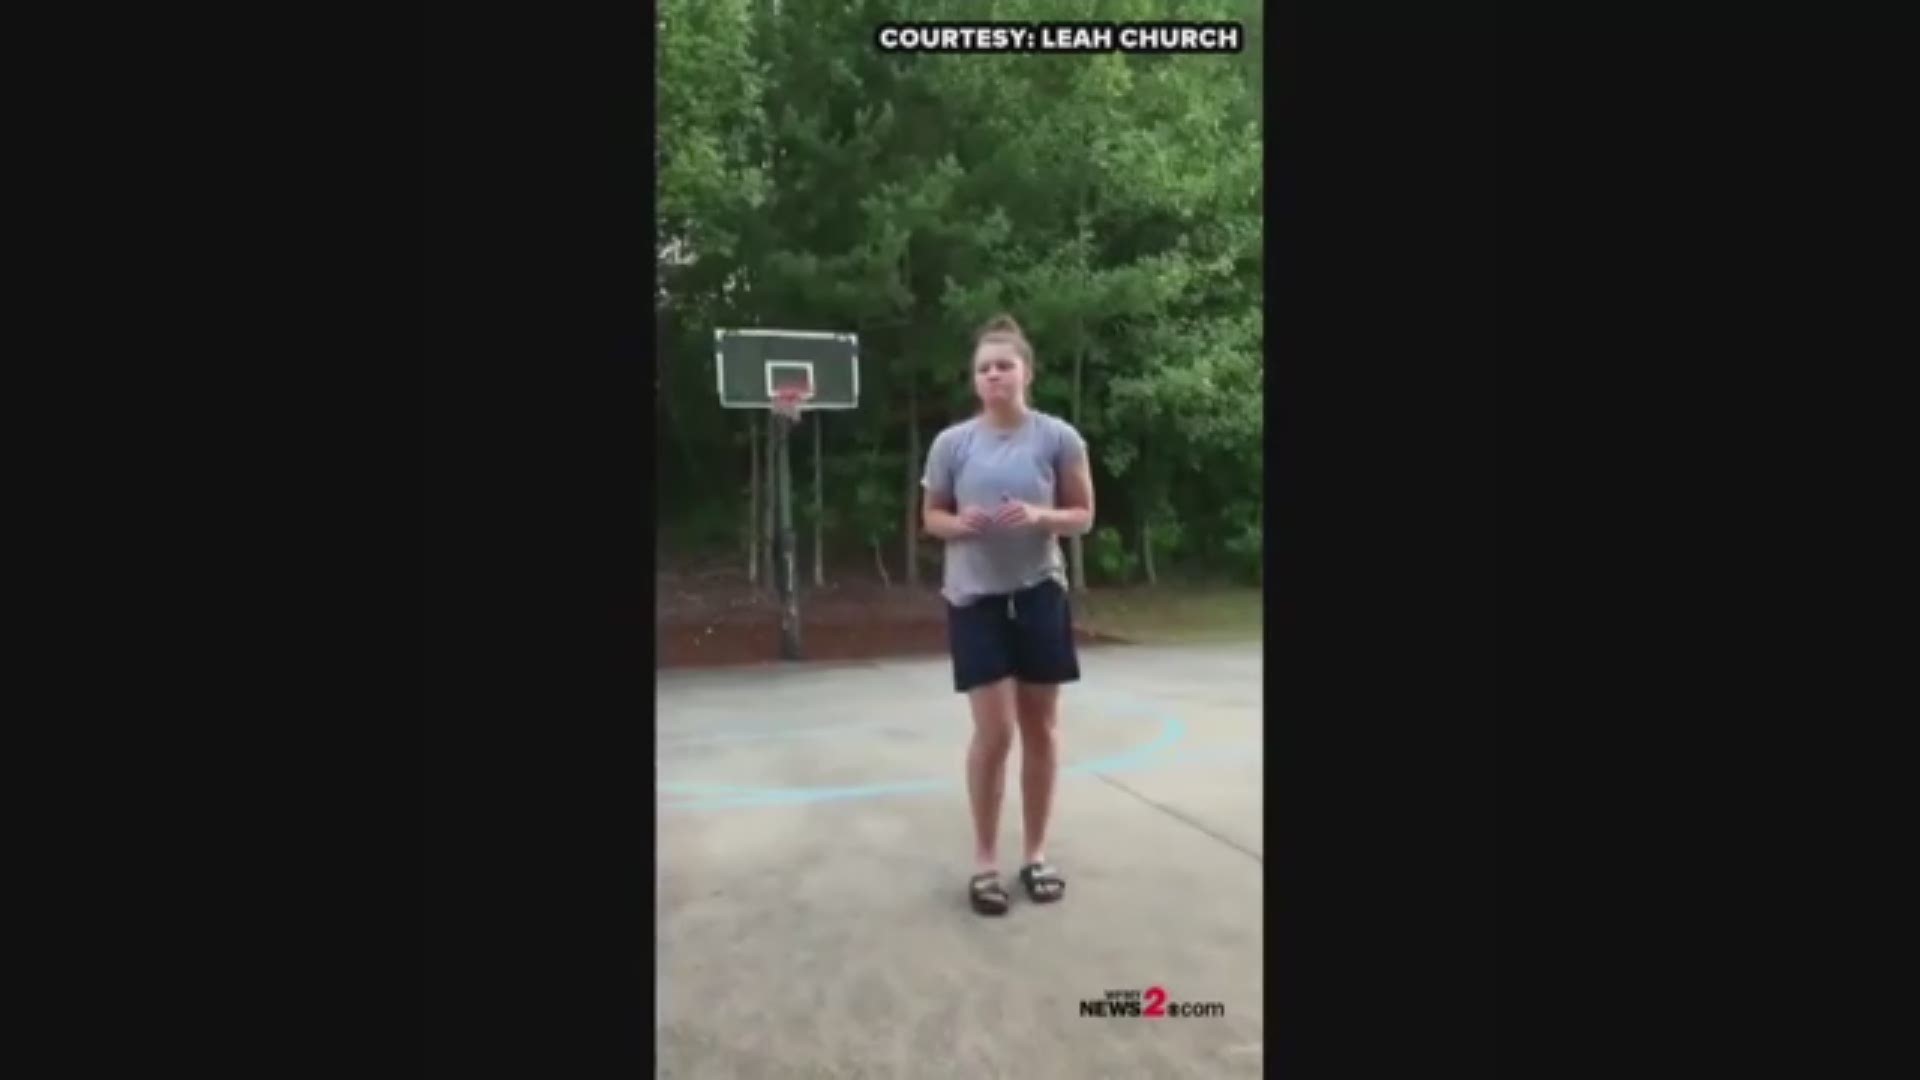 She’s already in the mood for March Madness! UNC Women’s Basketball Guard Leah Church sinks backwards shots!